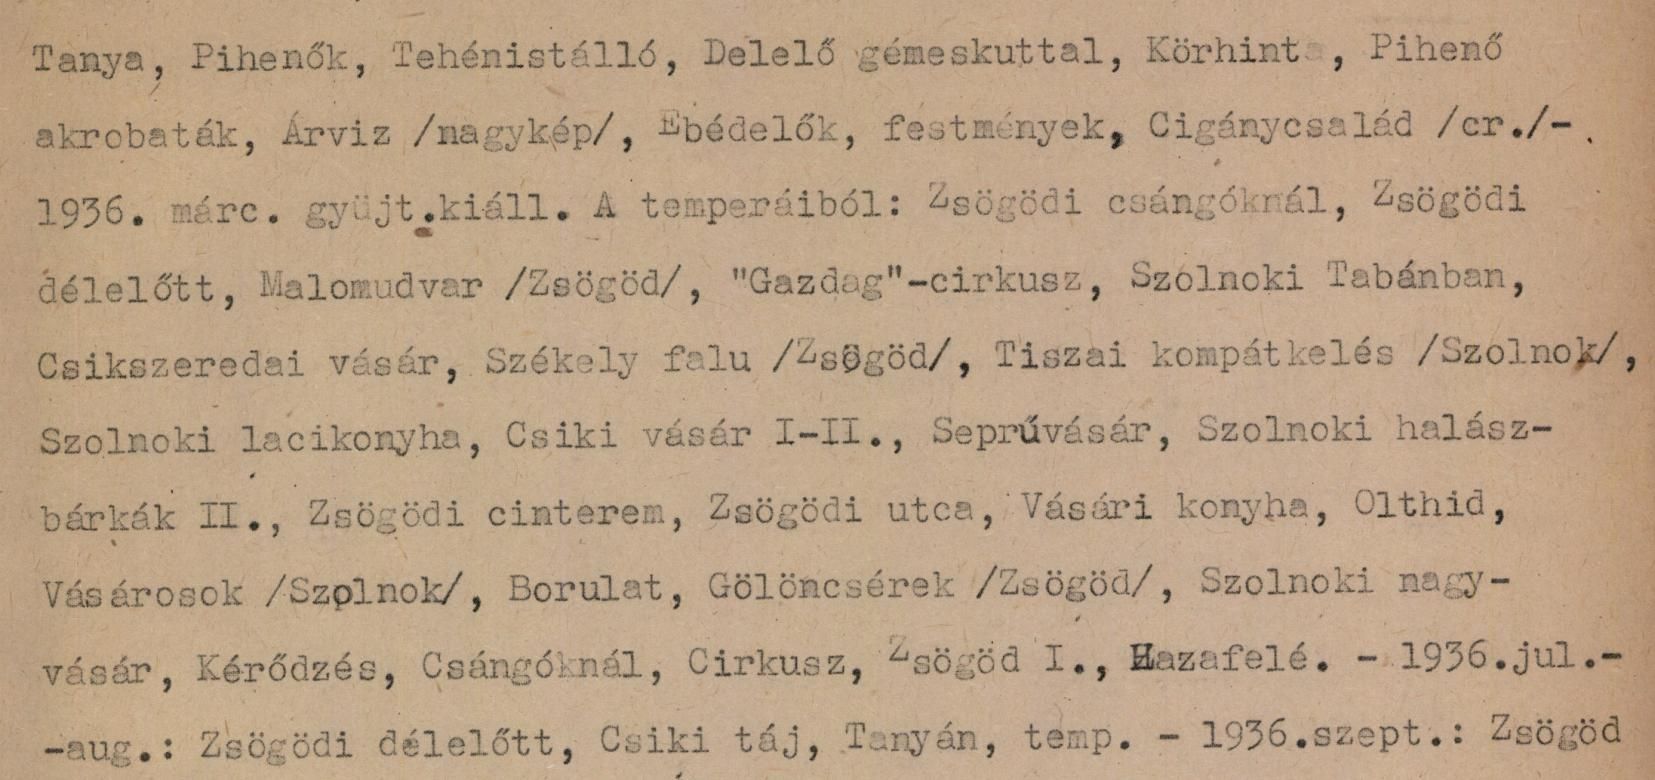 Archive of Hungarian Artists sample